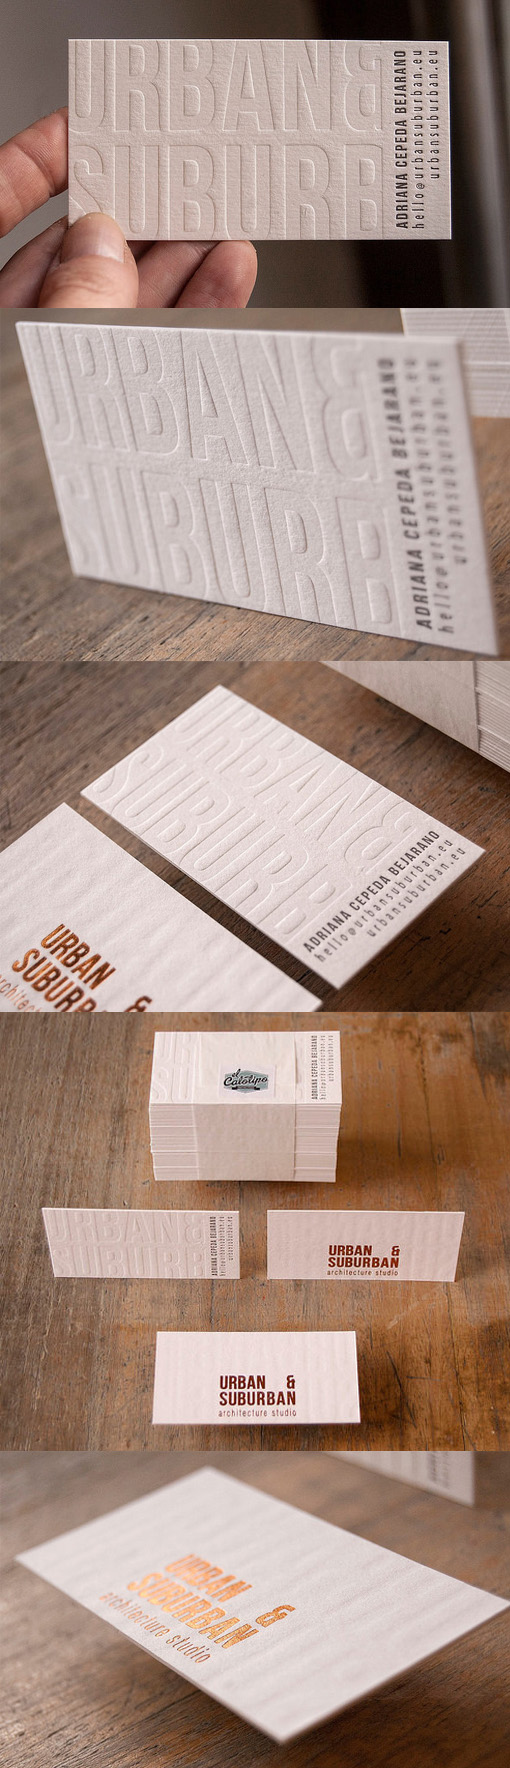 Deeply Embossed White Textured Letterpress Copper Foiled Business Card For An Architect